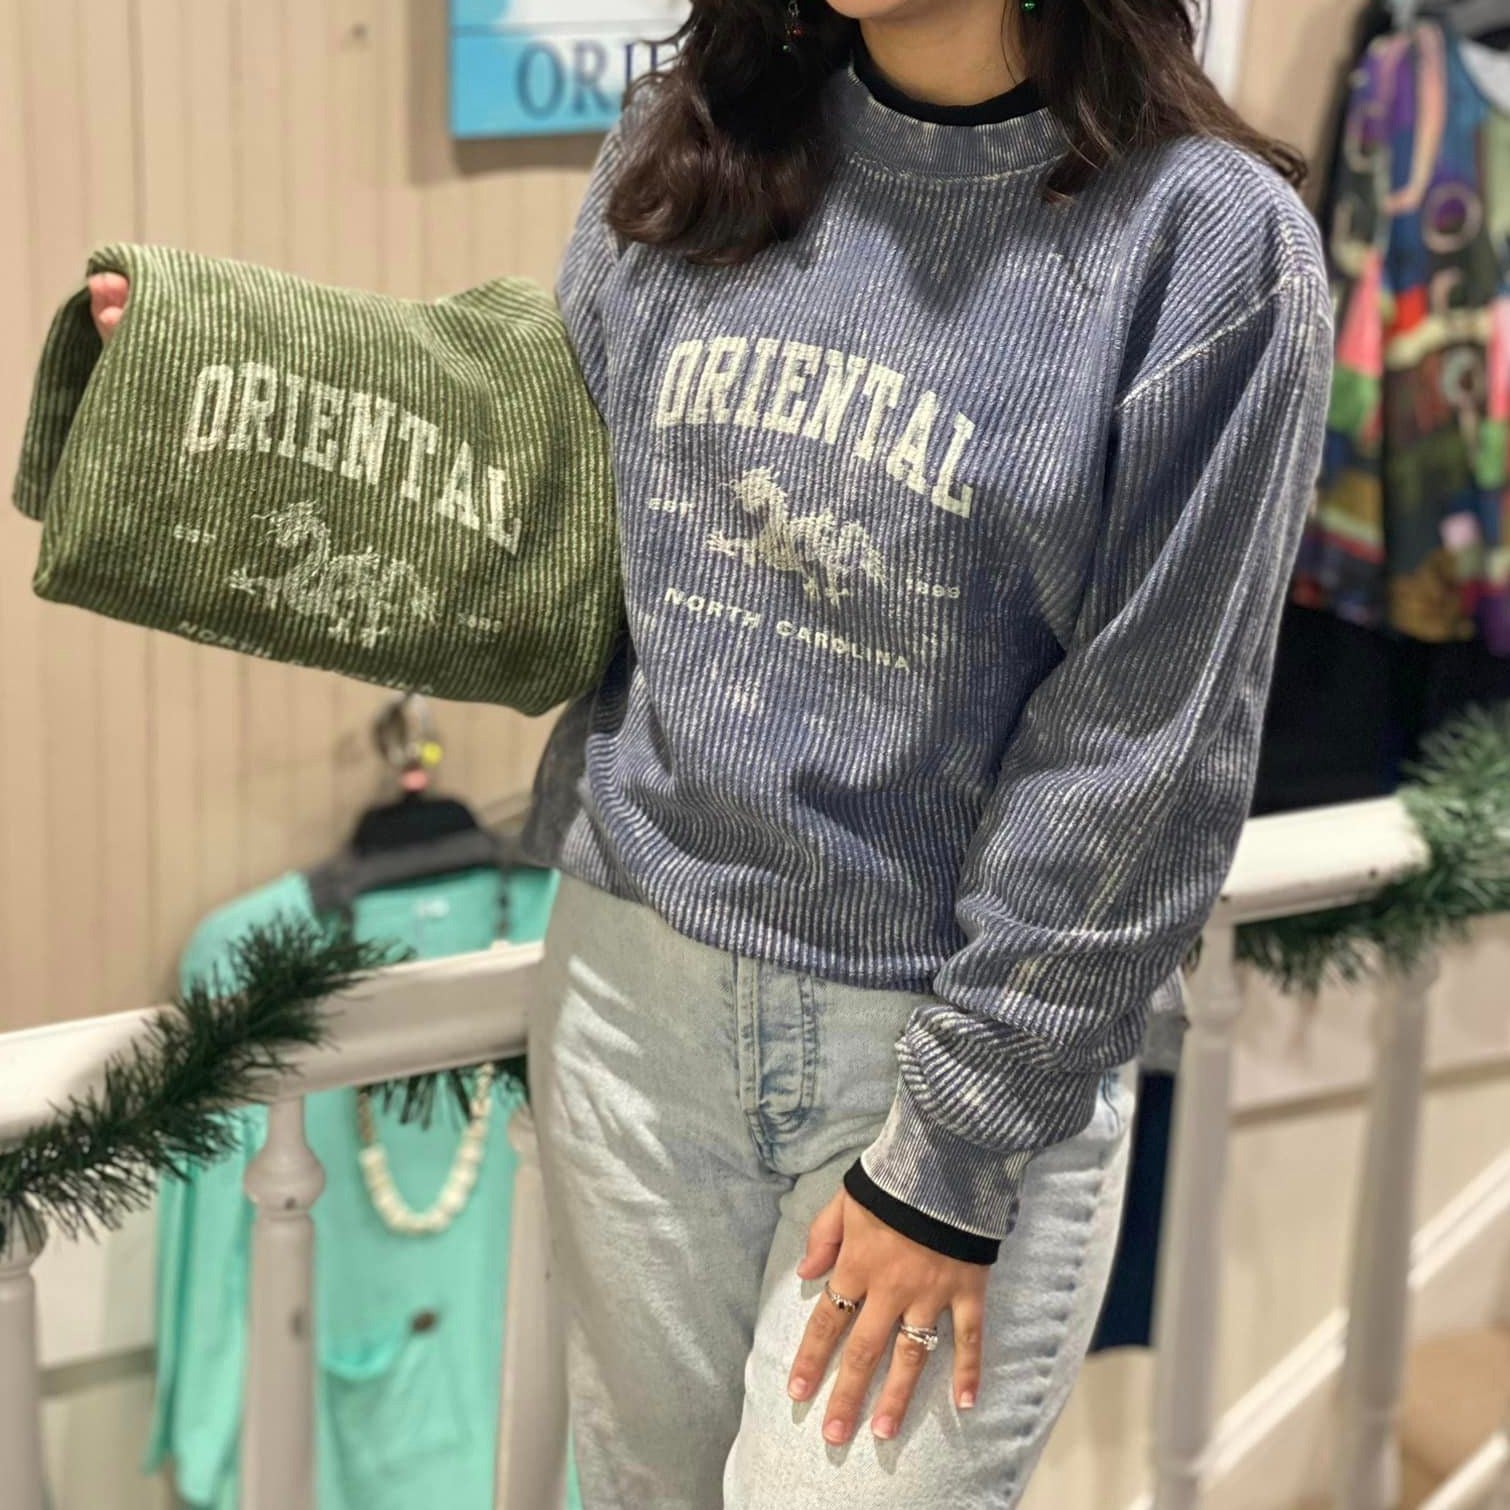 Alivia is wearing our Vintage Dragon Corded Crew in Indigo